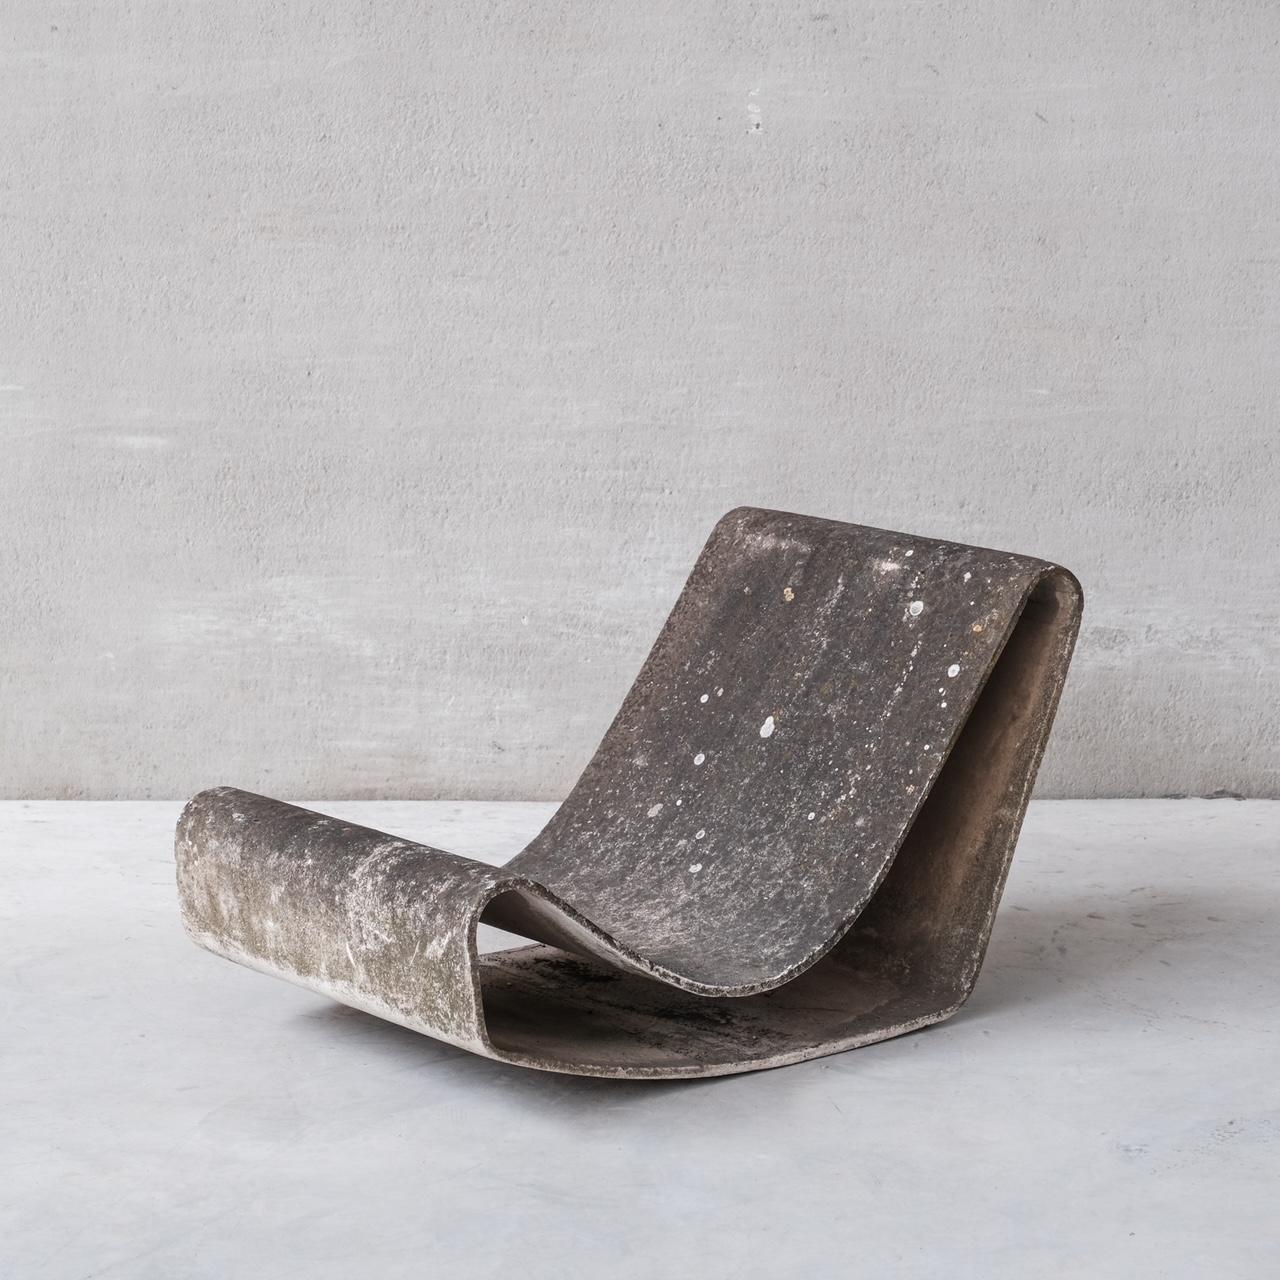 A pair of 'Loop' lounge/garden chairs by Willy Guhl for Eternit AG.

A continuous sheet of concrete, these have aged amazingly, and remain in perfect condition. 

Switzerland, c1950s. 

Price is for the pair. 

Rare model to find in such